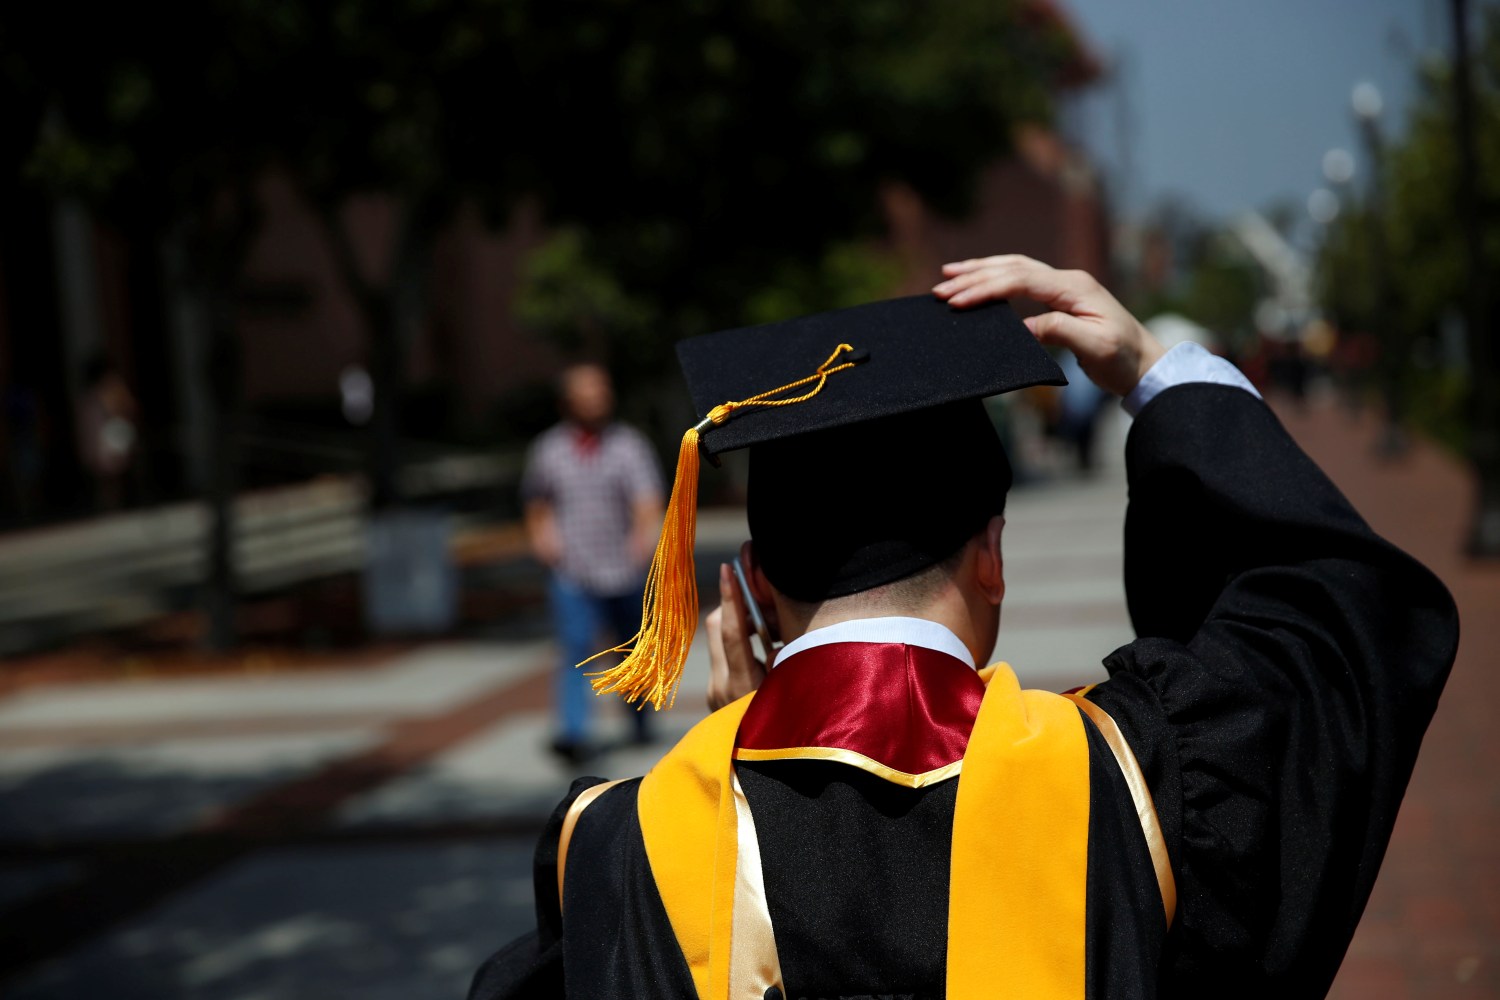 A graduate holds their mortarboard cap after a commencement ceremony at the University of Southern California (USC) in Los Angeles, California, U.S., May 12, 2017. REUTERS/Patrick T. Fallon - RC1D6F551E10